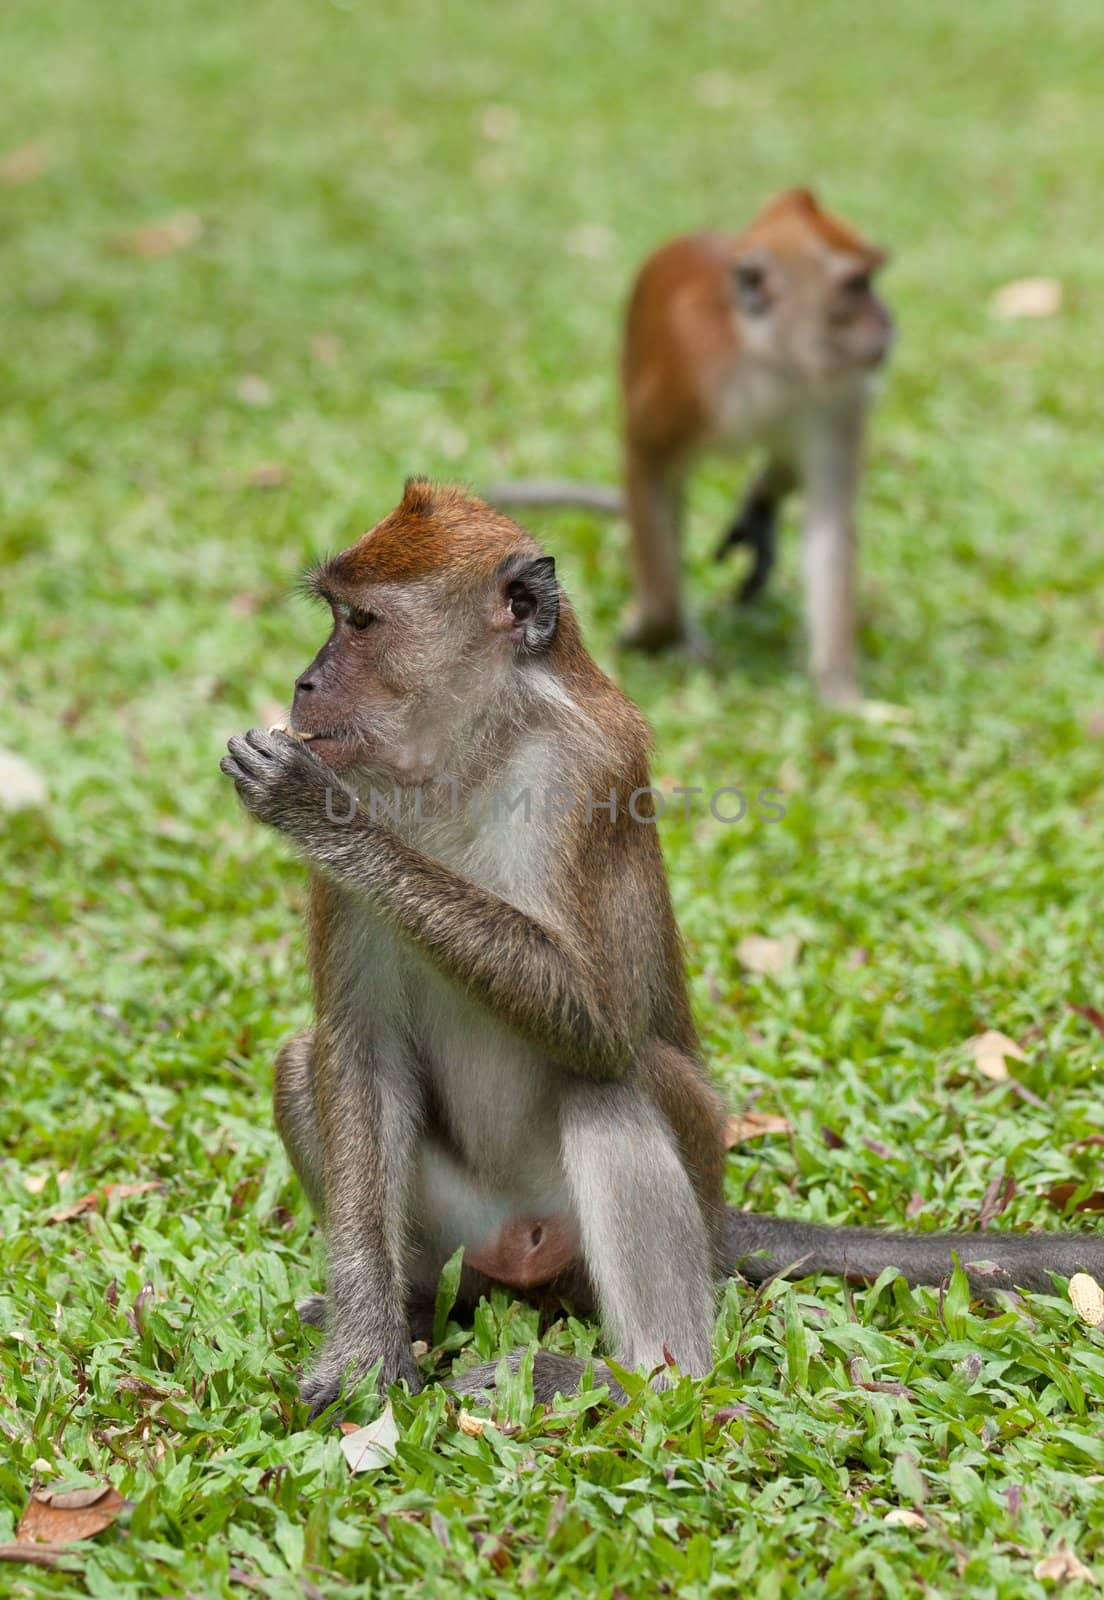 macaque monkey by clearviewstock